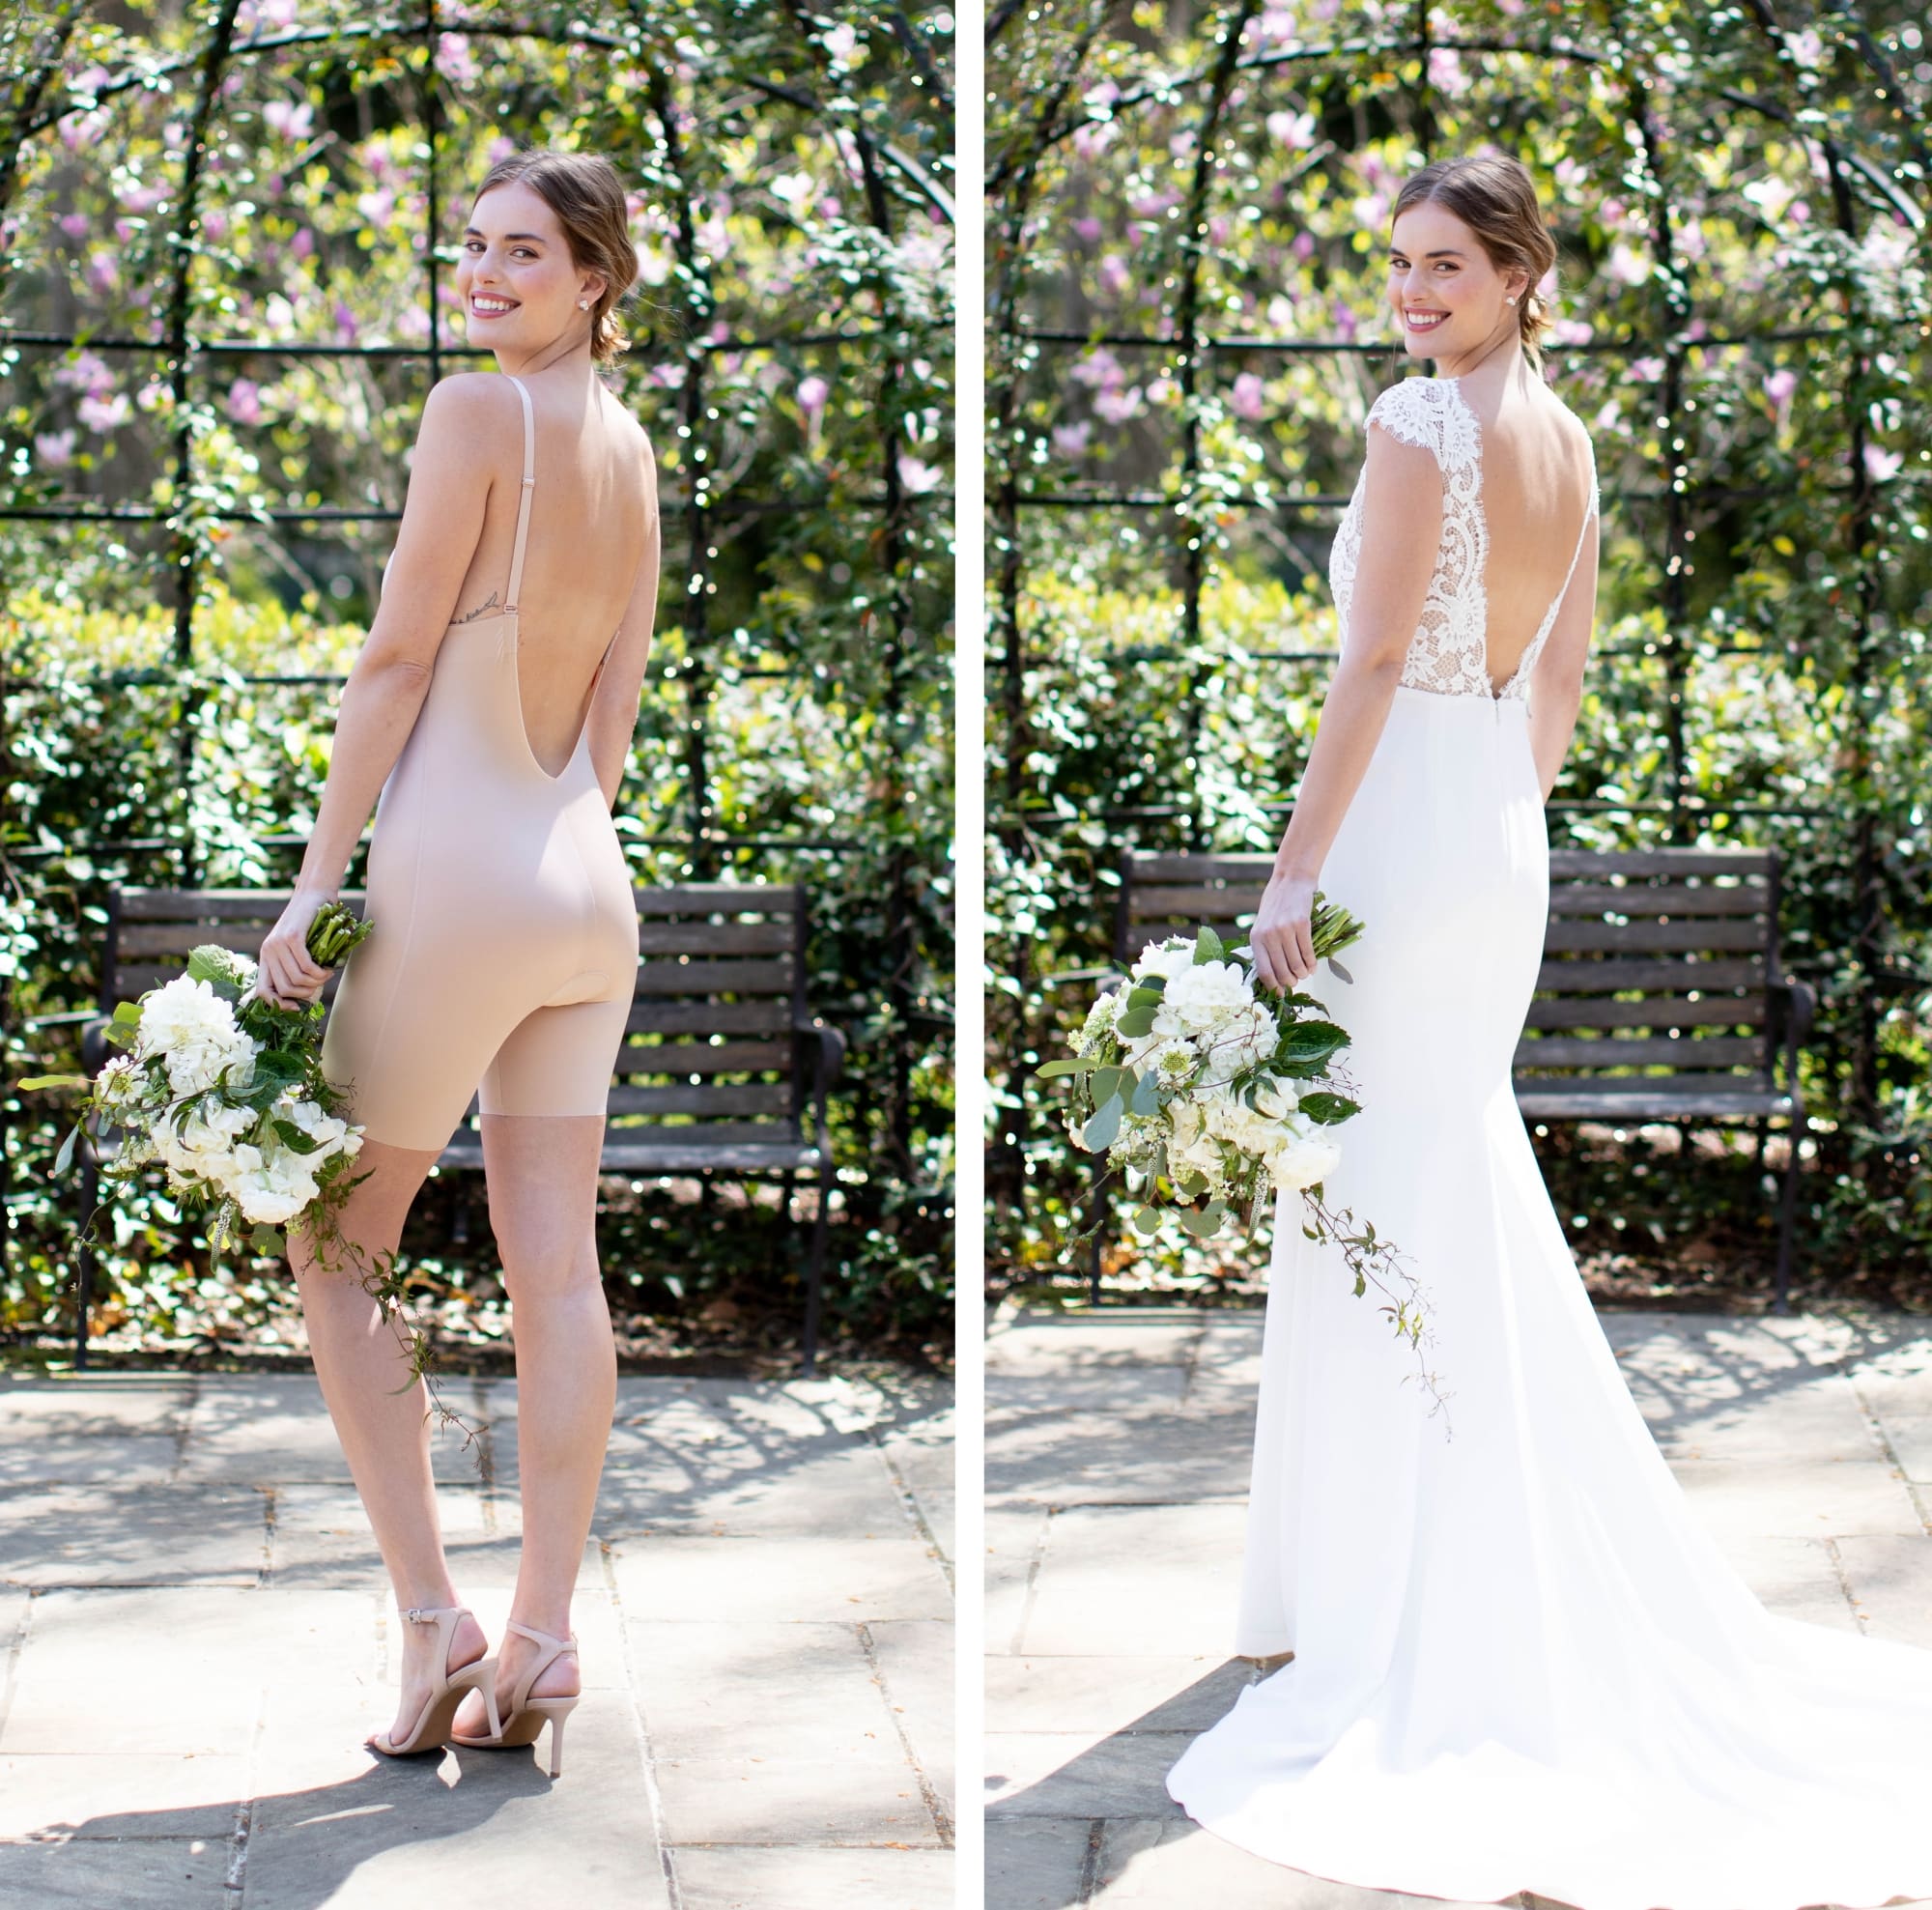 Bridal Undergarments That Every Bride Needs